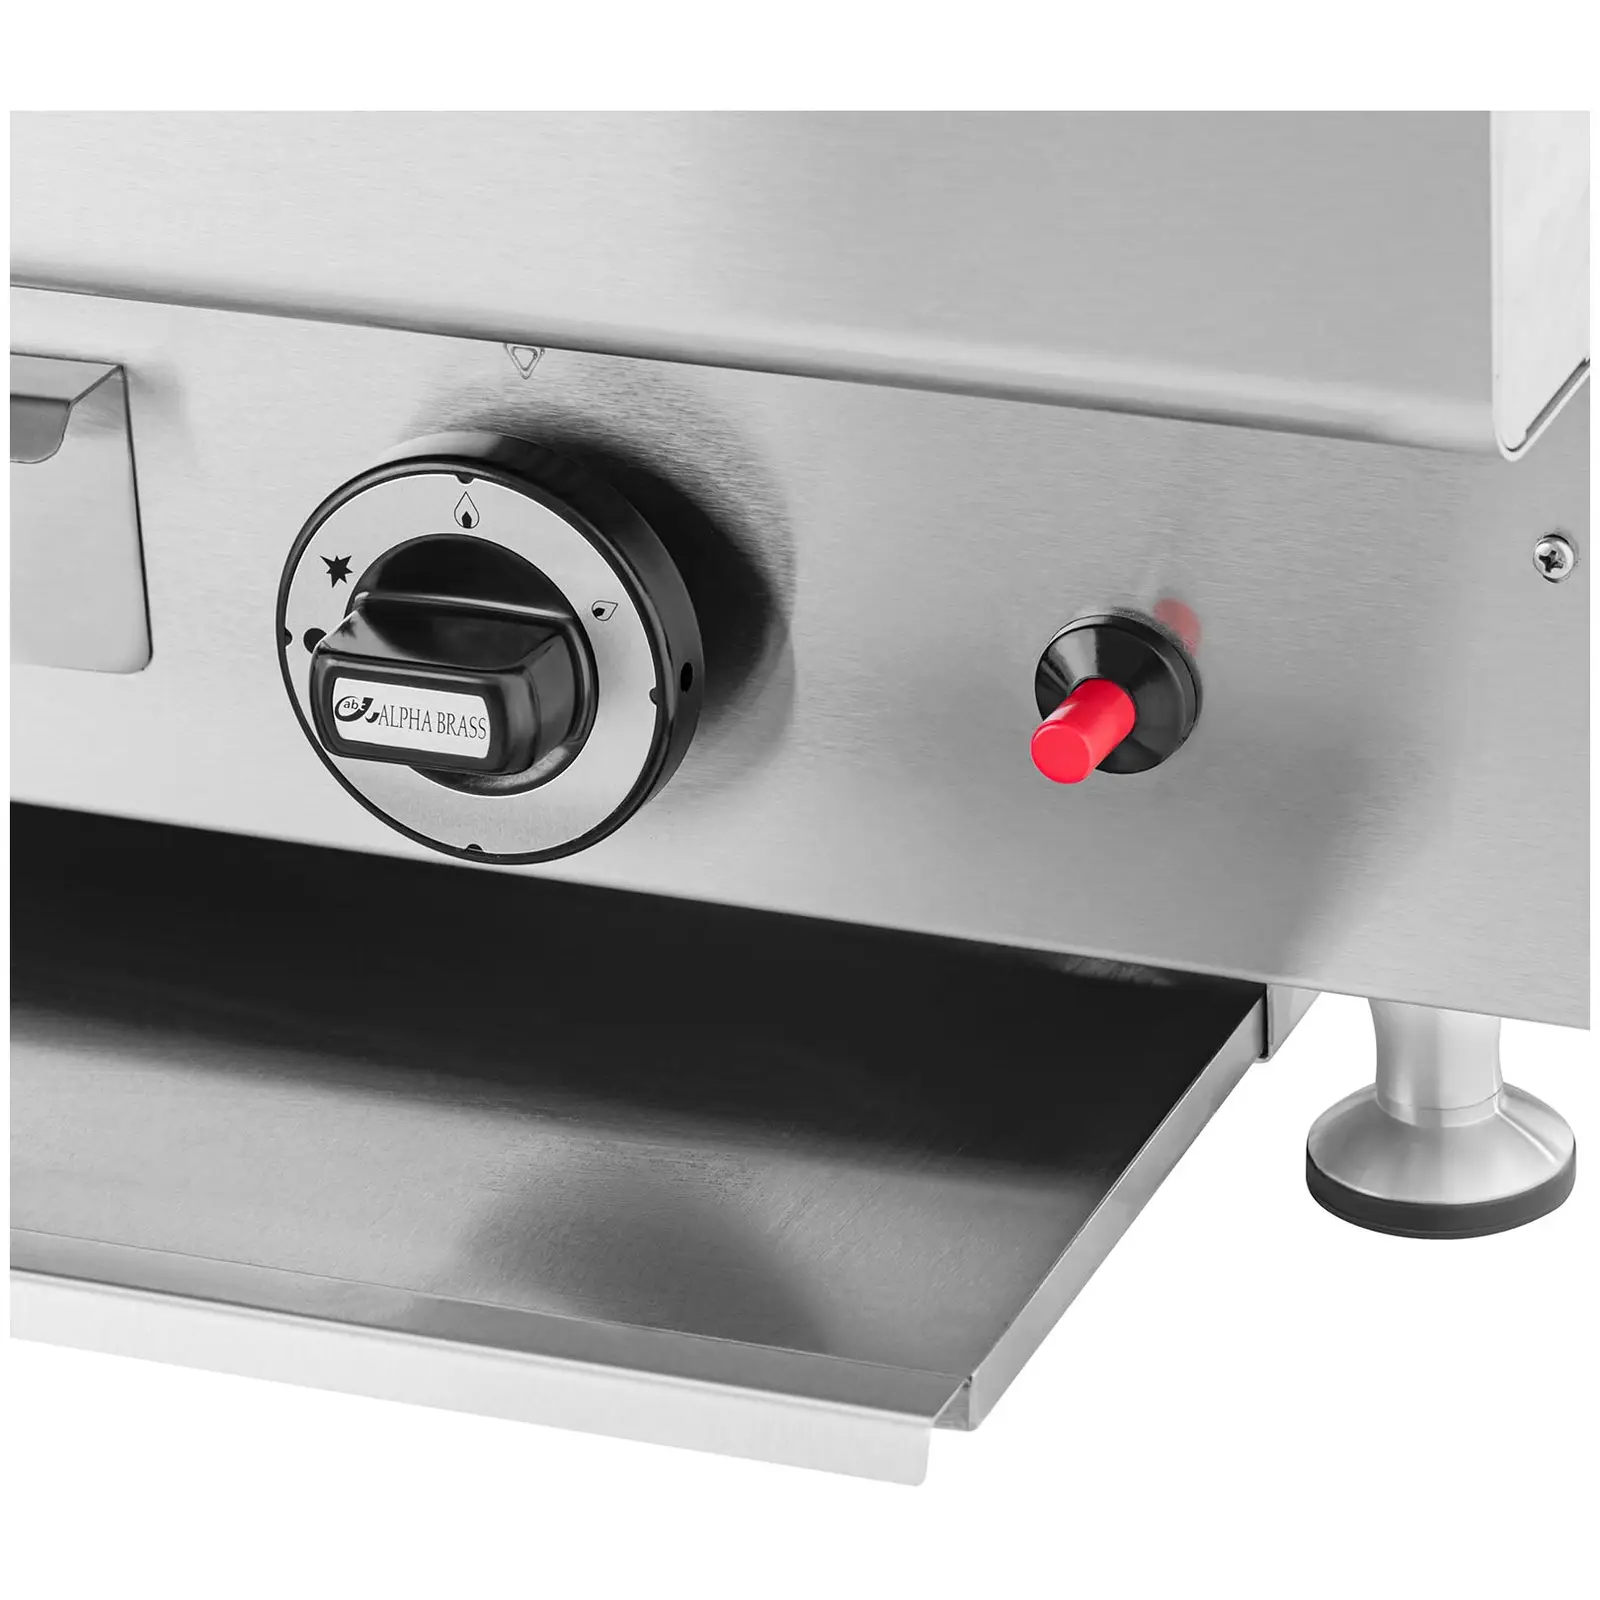 Lava Stone Grill - 2 x 7200 W - 50 x 47 cm - 0 - 460 °C - Royal Catering